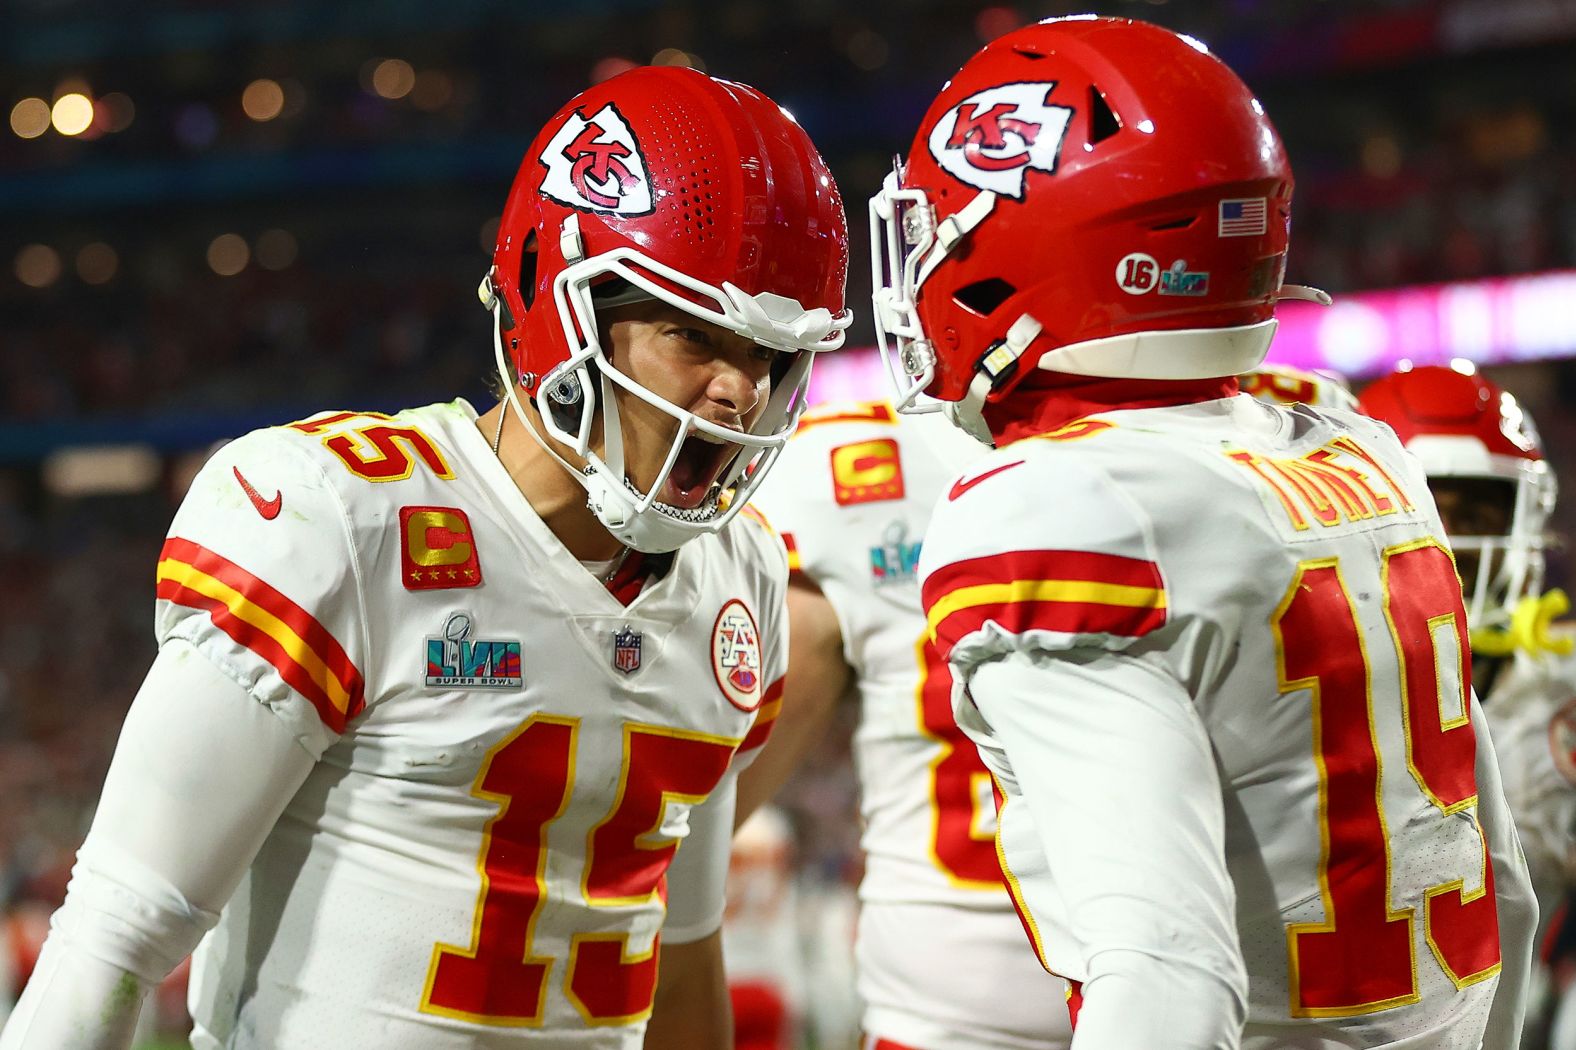 Mahomes celebrates with Toney after they connected on a 5-yard touchdown pass in the fourth quarter. After the extra point, the Chiefs had their first lead of the game, 28-27.